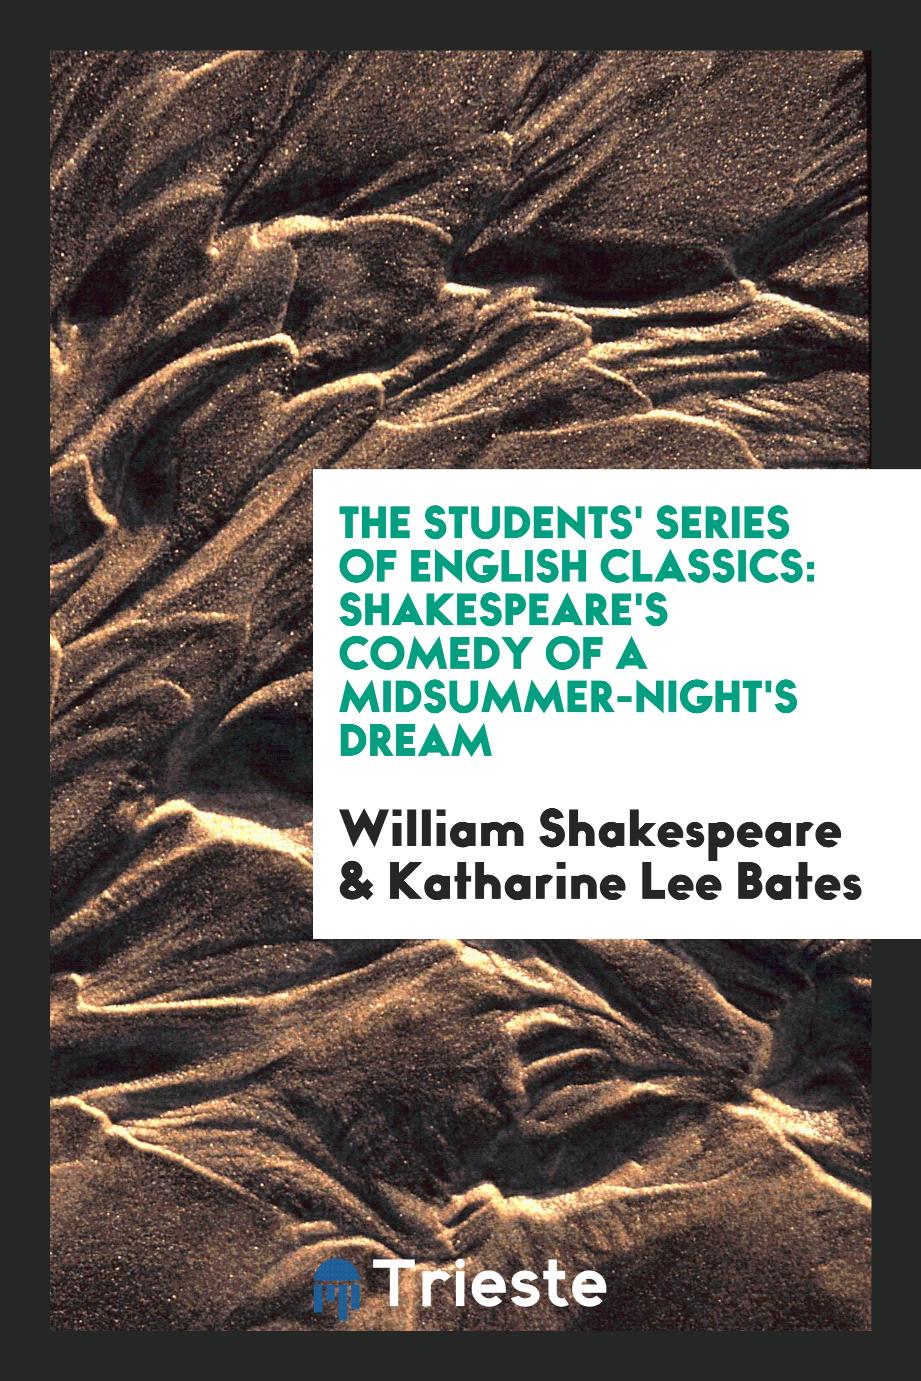 The Students' Series of English Classics: Shakespeare's Comedy of A Midsummer-Night's Dream